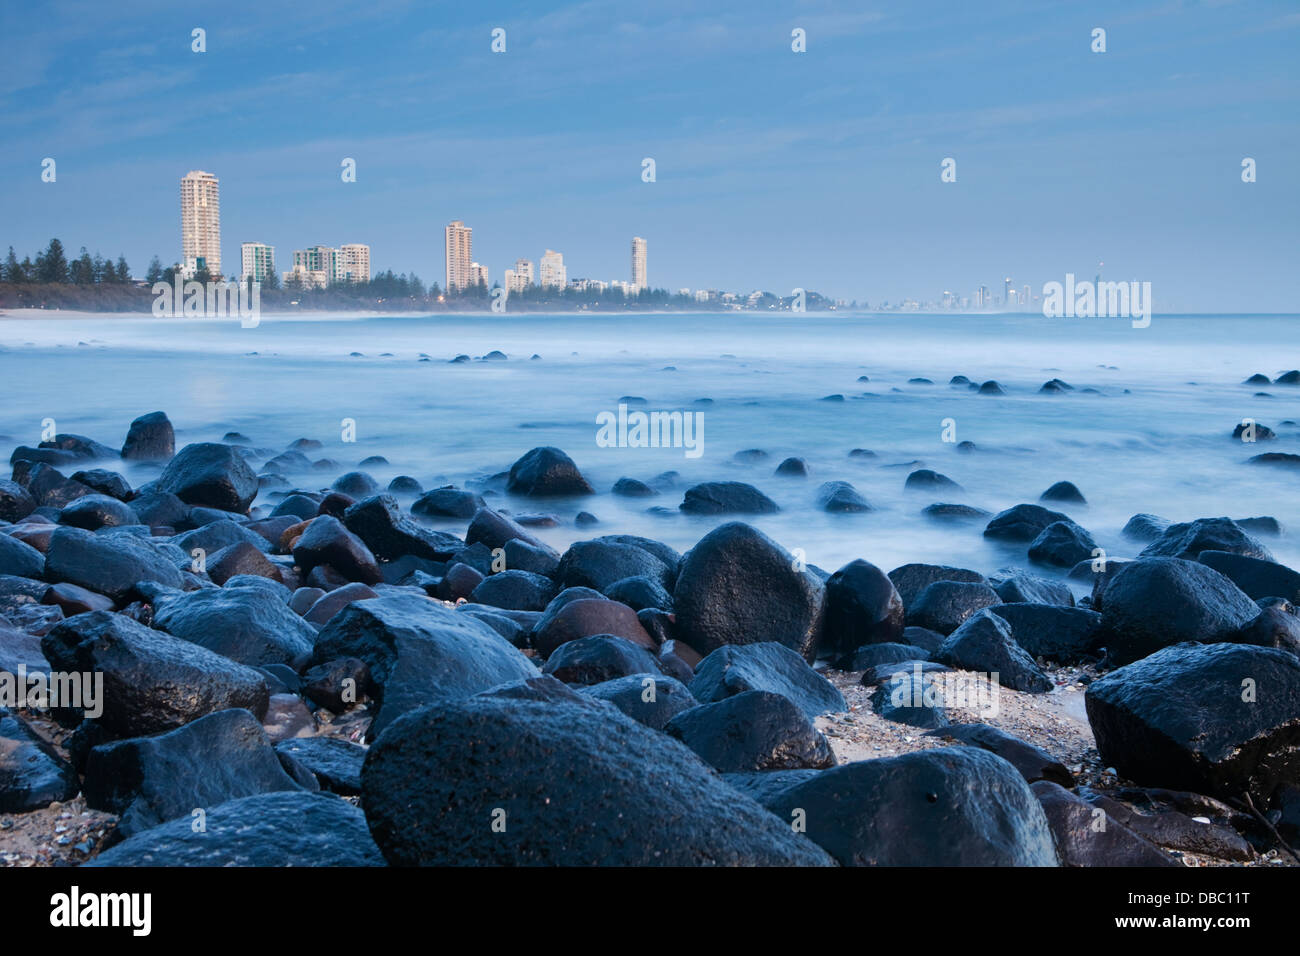 View along the coast at twilight, viewed from Burleigh Heads. Burleigh Heads, Gold Coast, Queensland, Australia Stock Photo